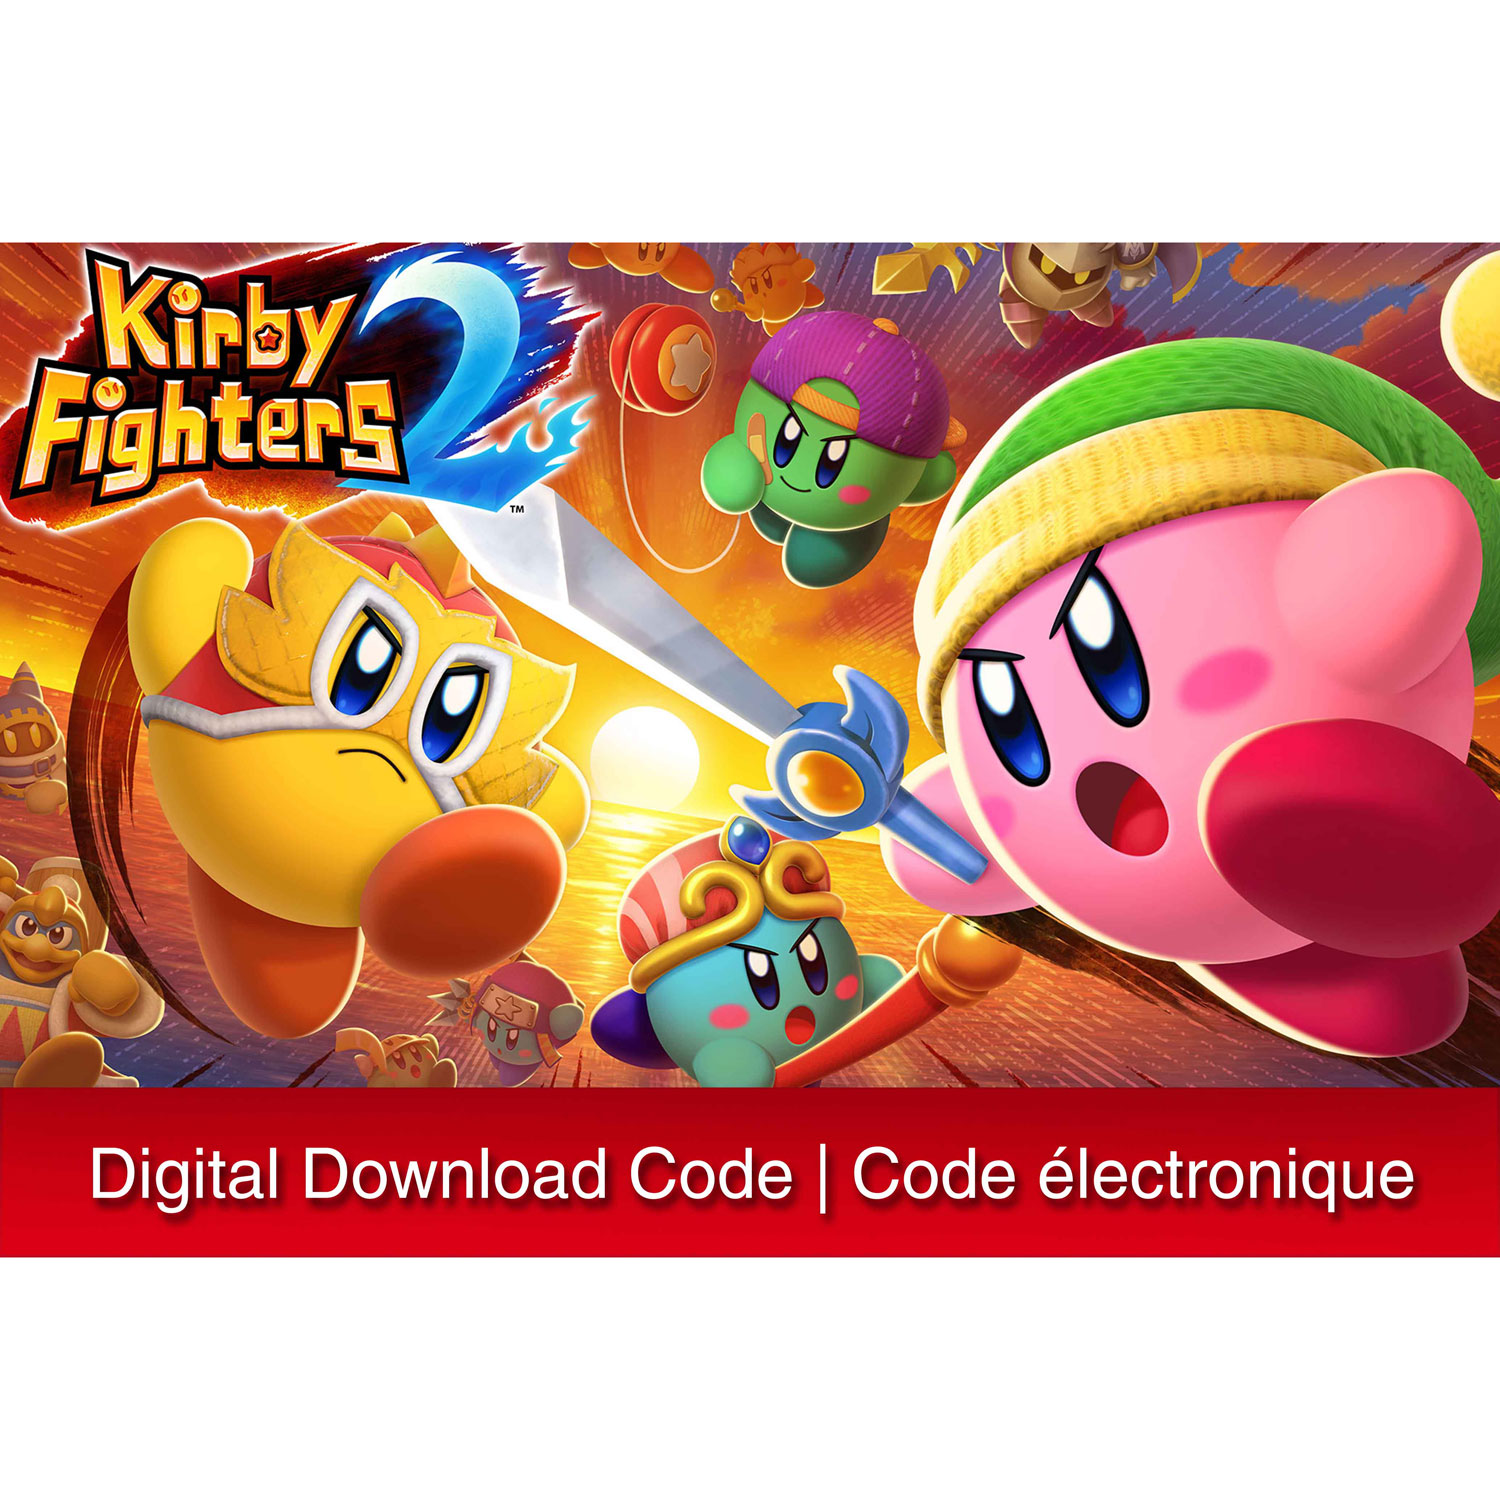 Kirby Fighters 2 (Switch) - Digital Download